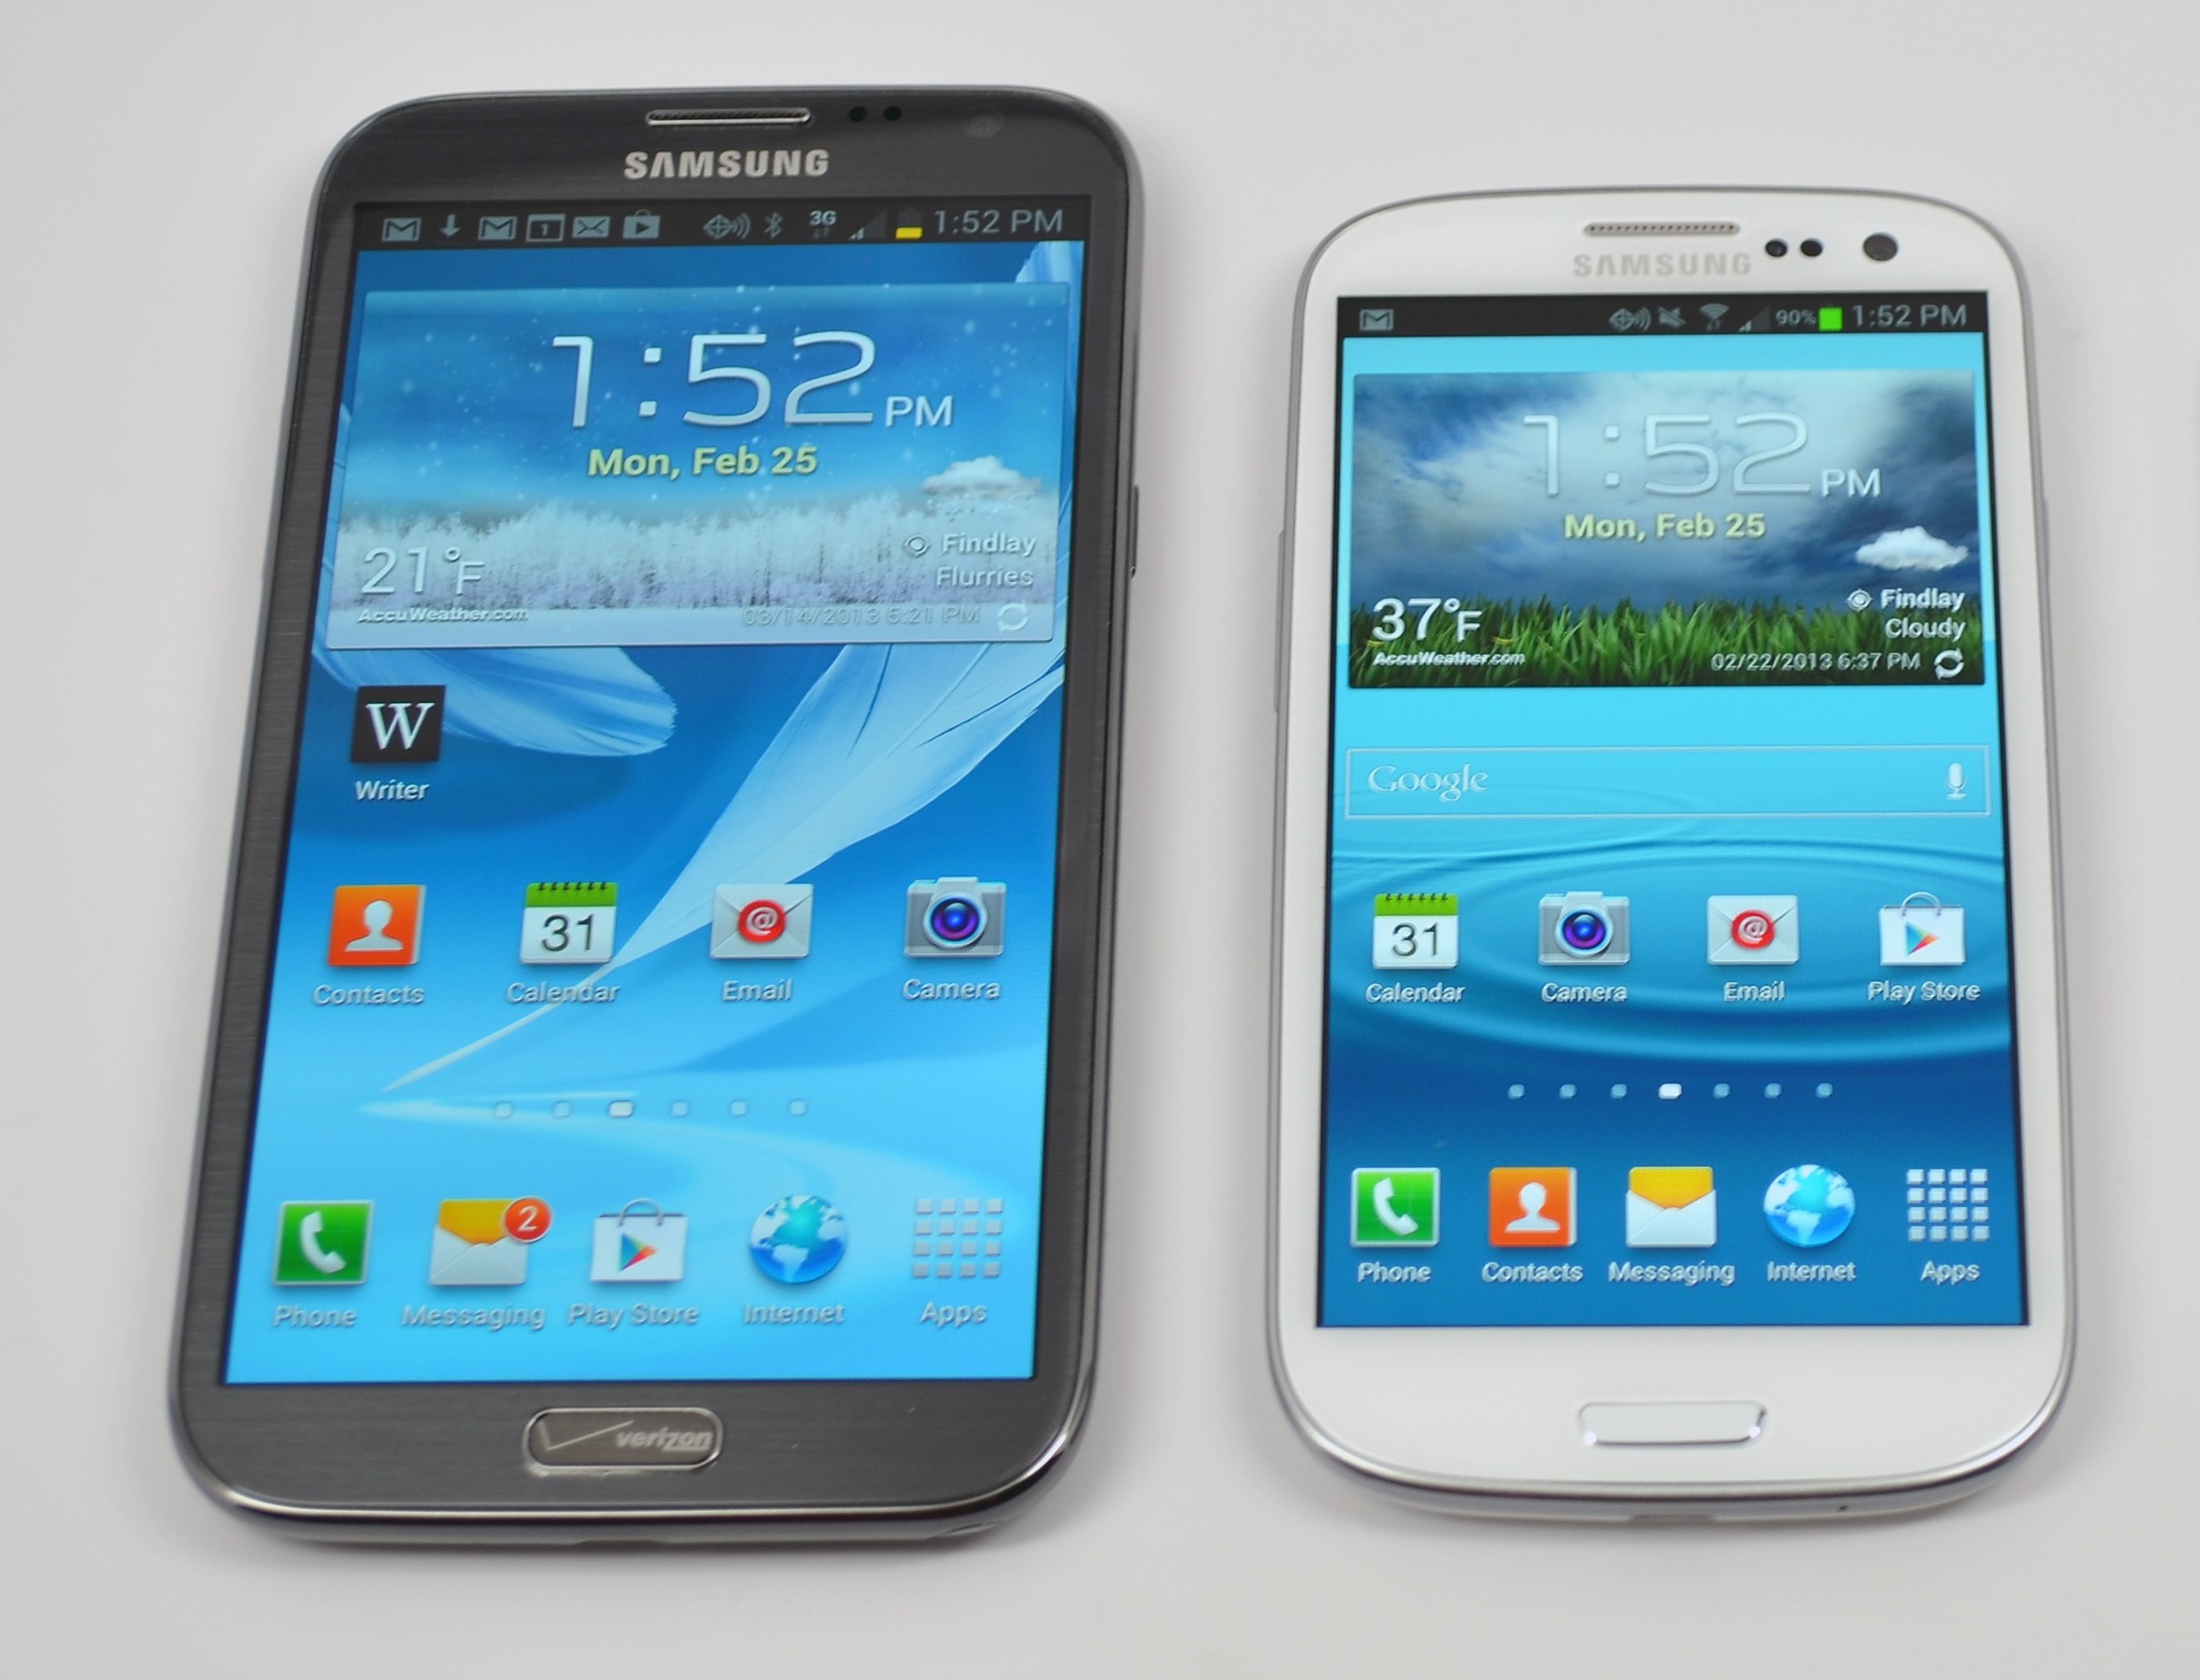 How to Update Android 4.3 on Samsung Galaxy S3 